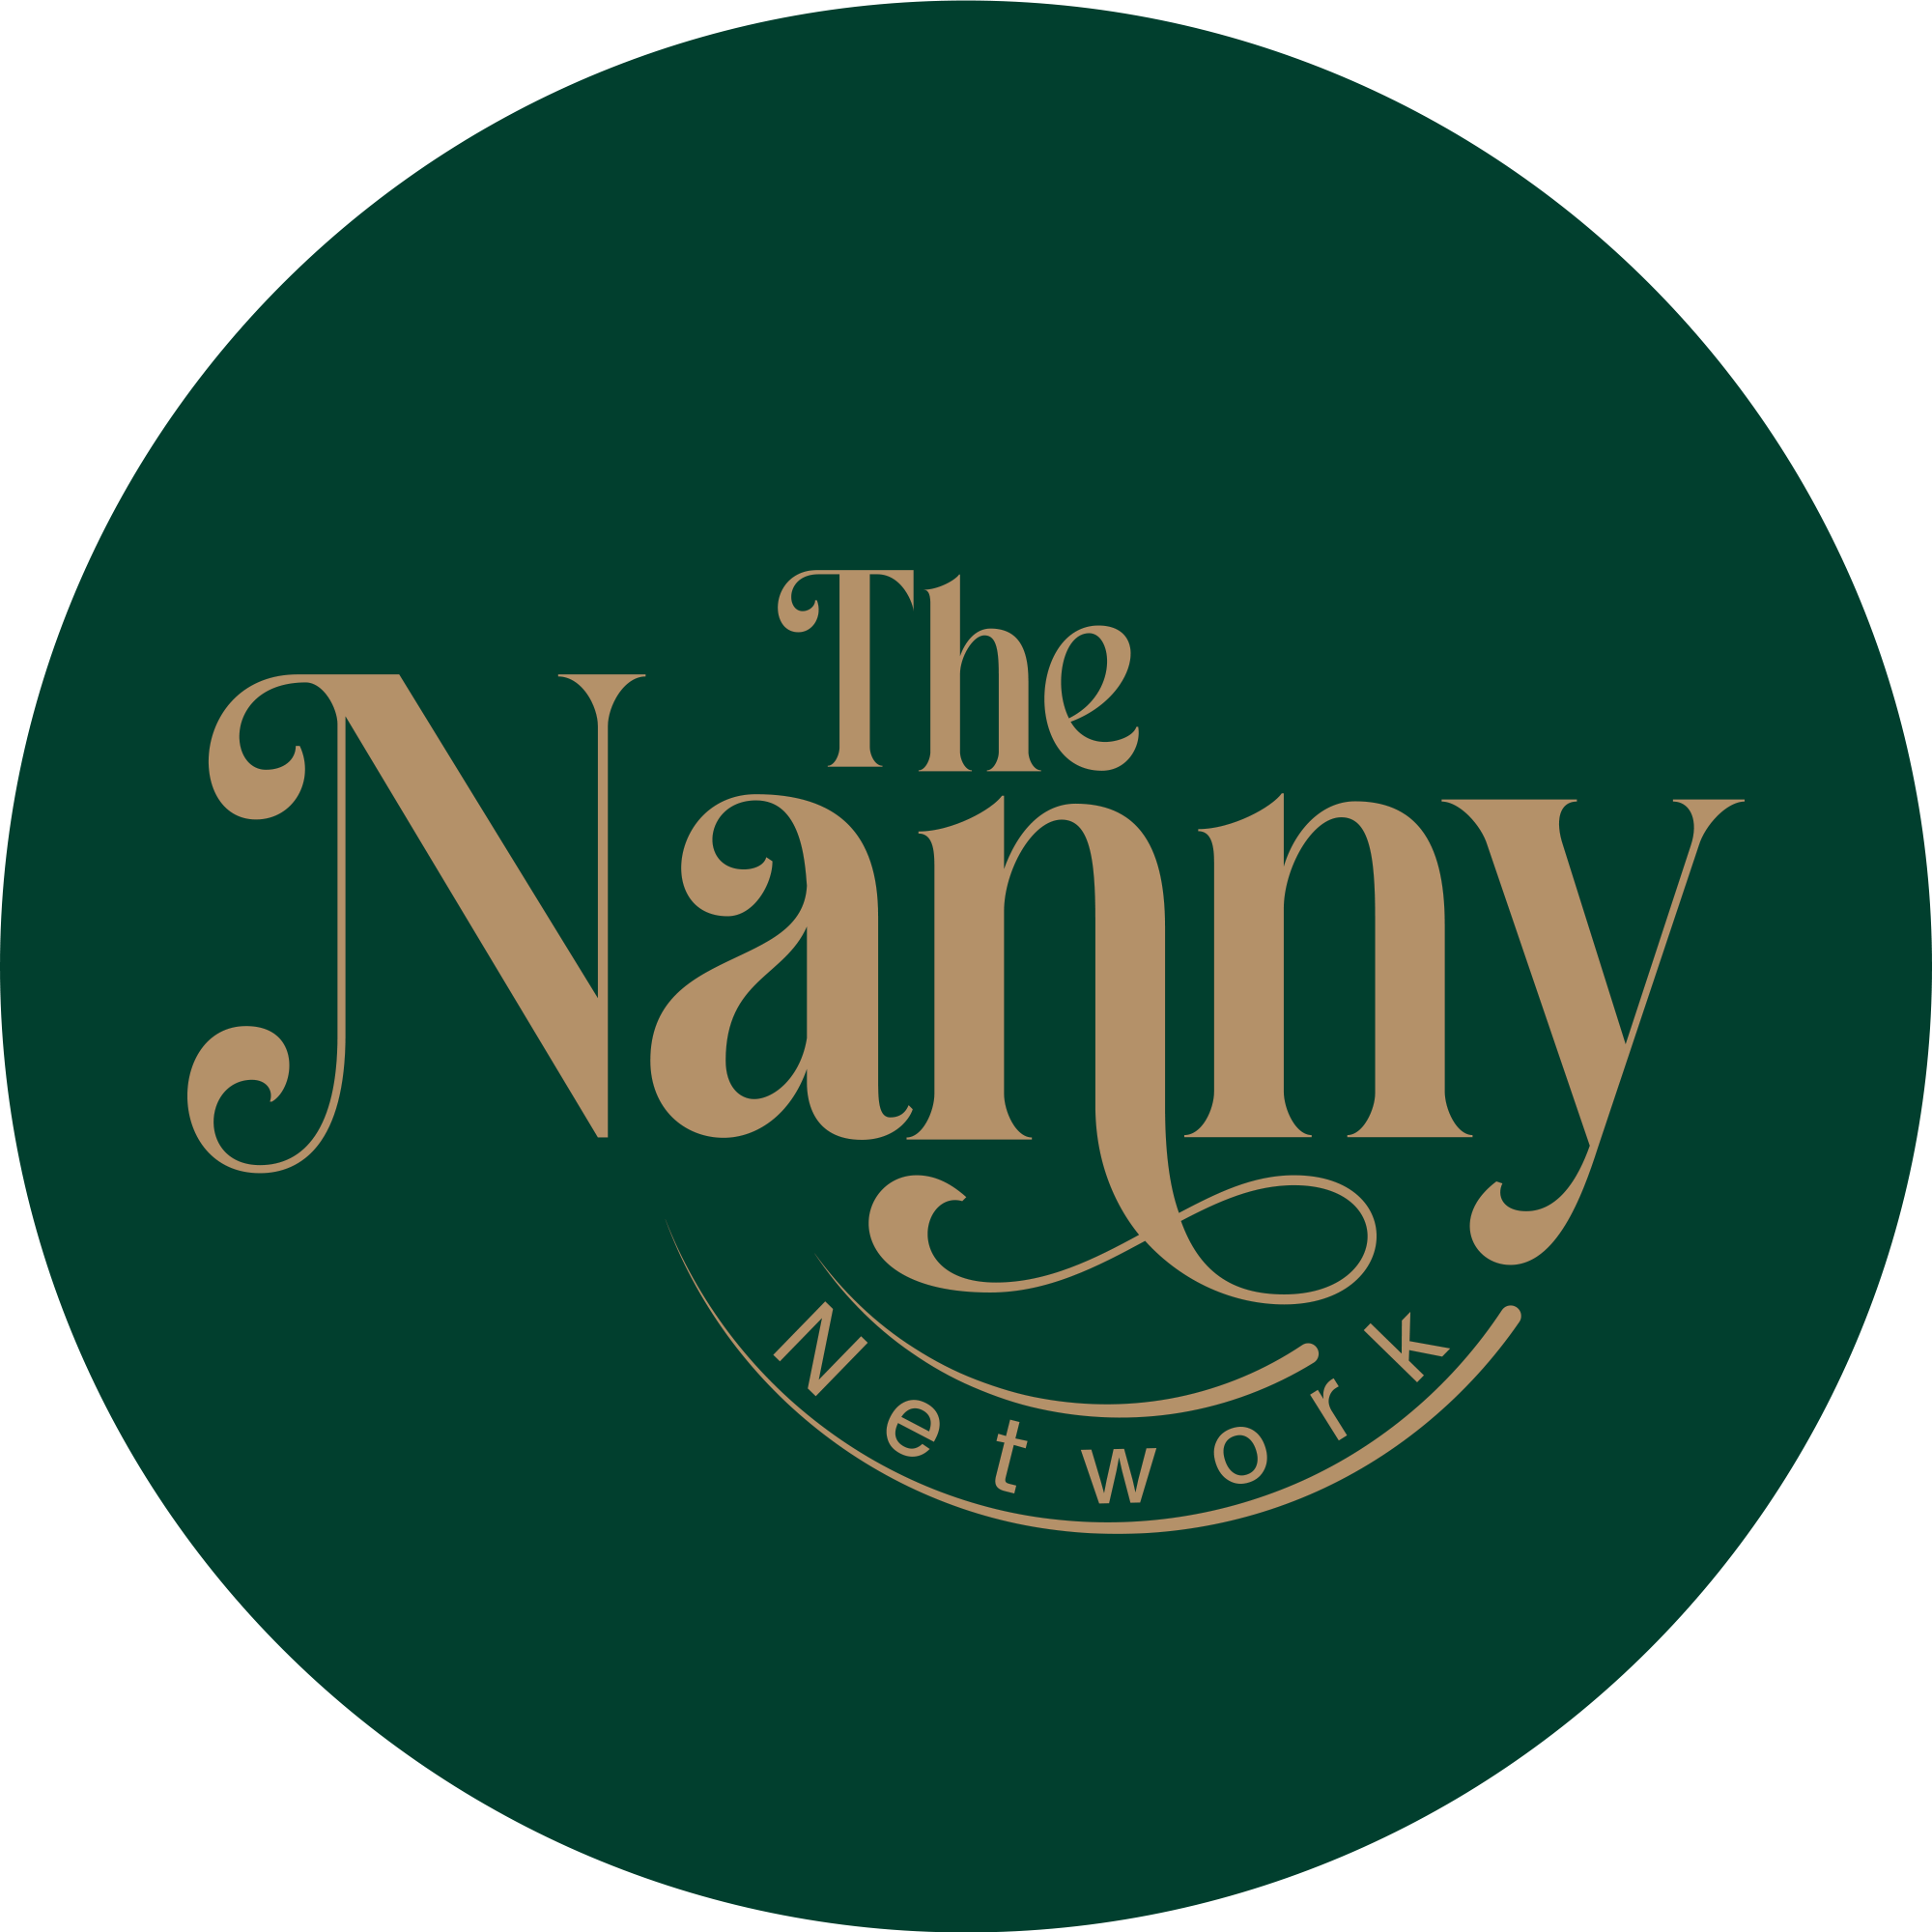 The Nanny Network Families